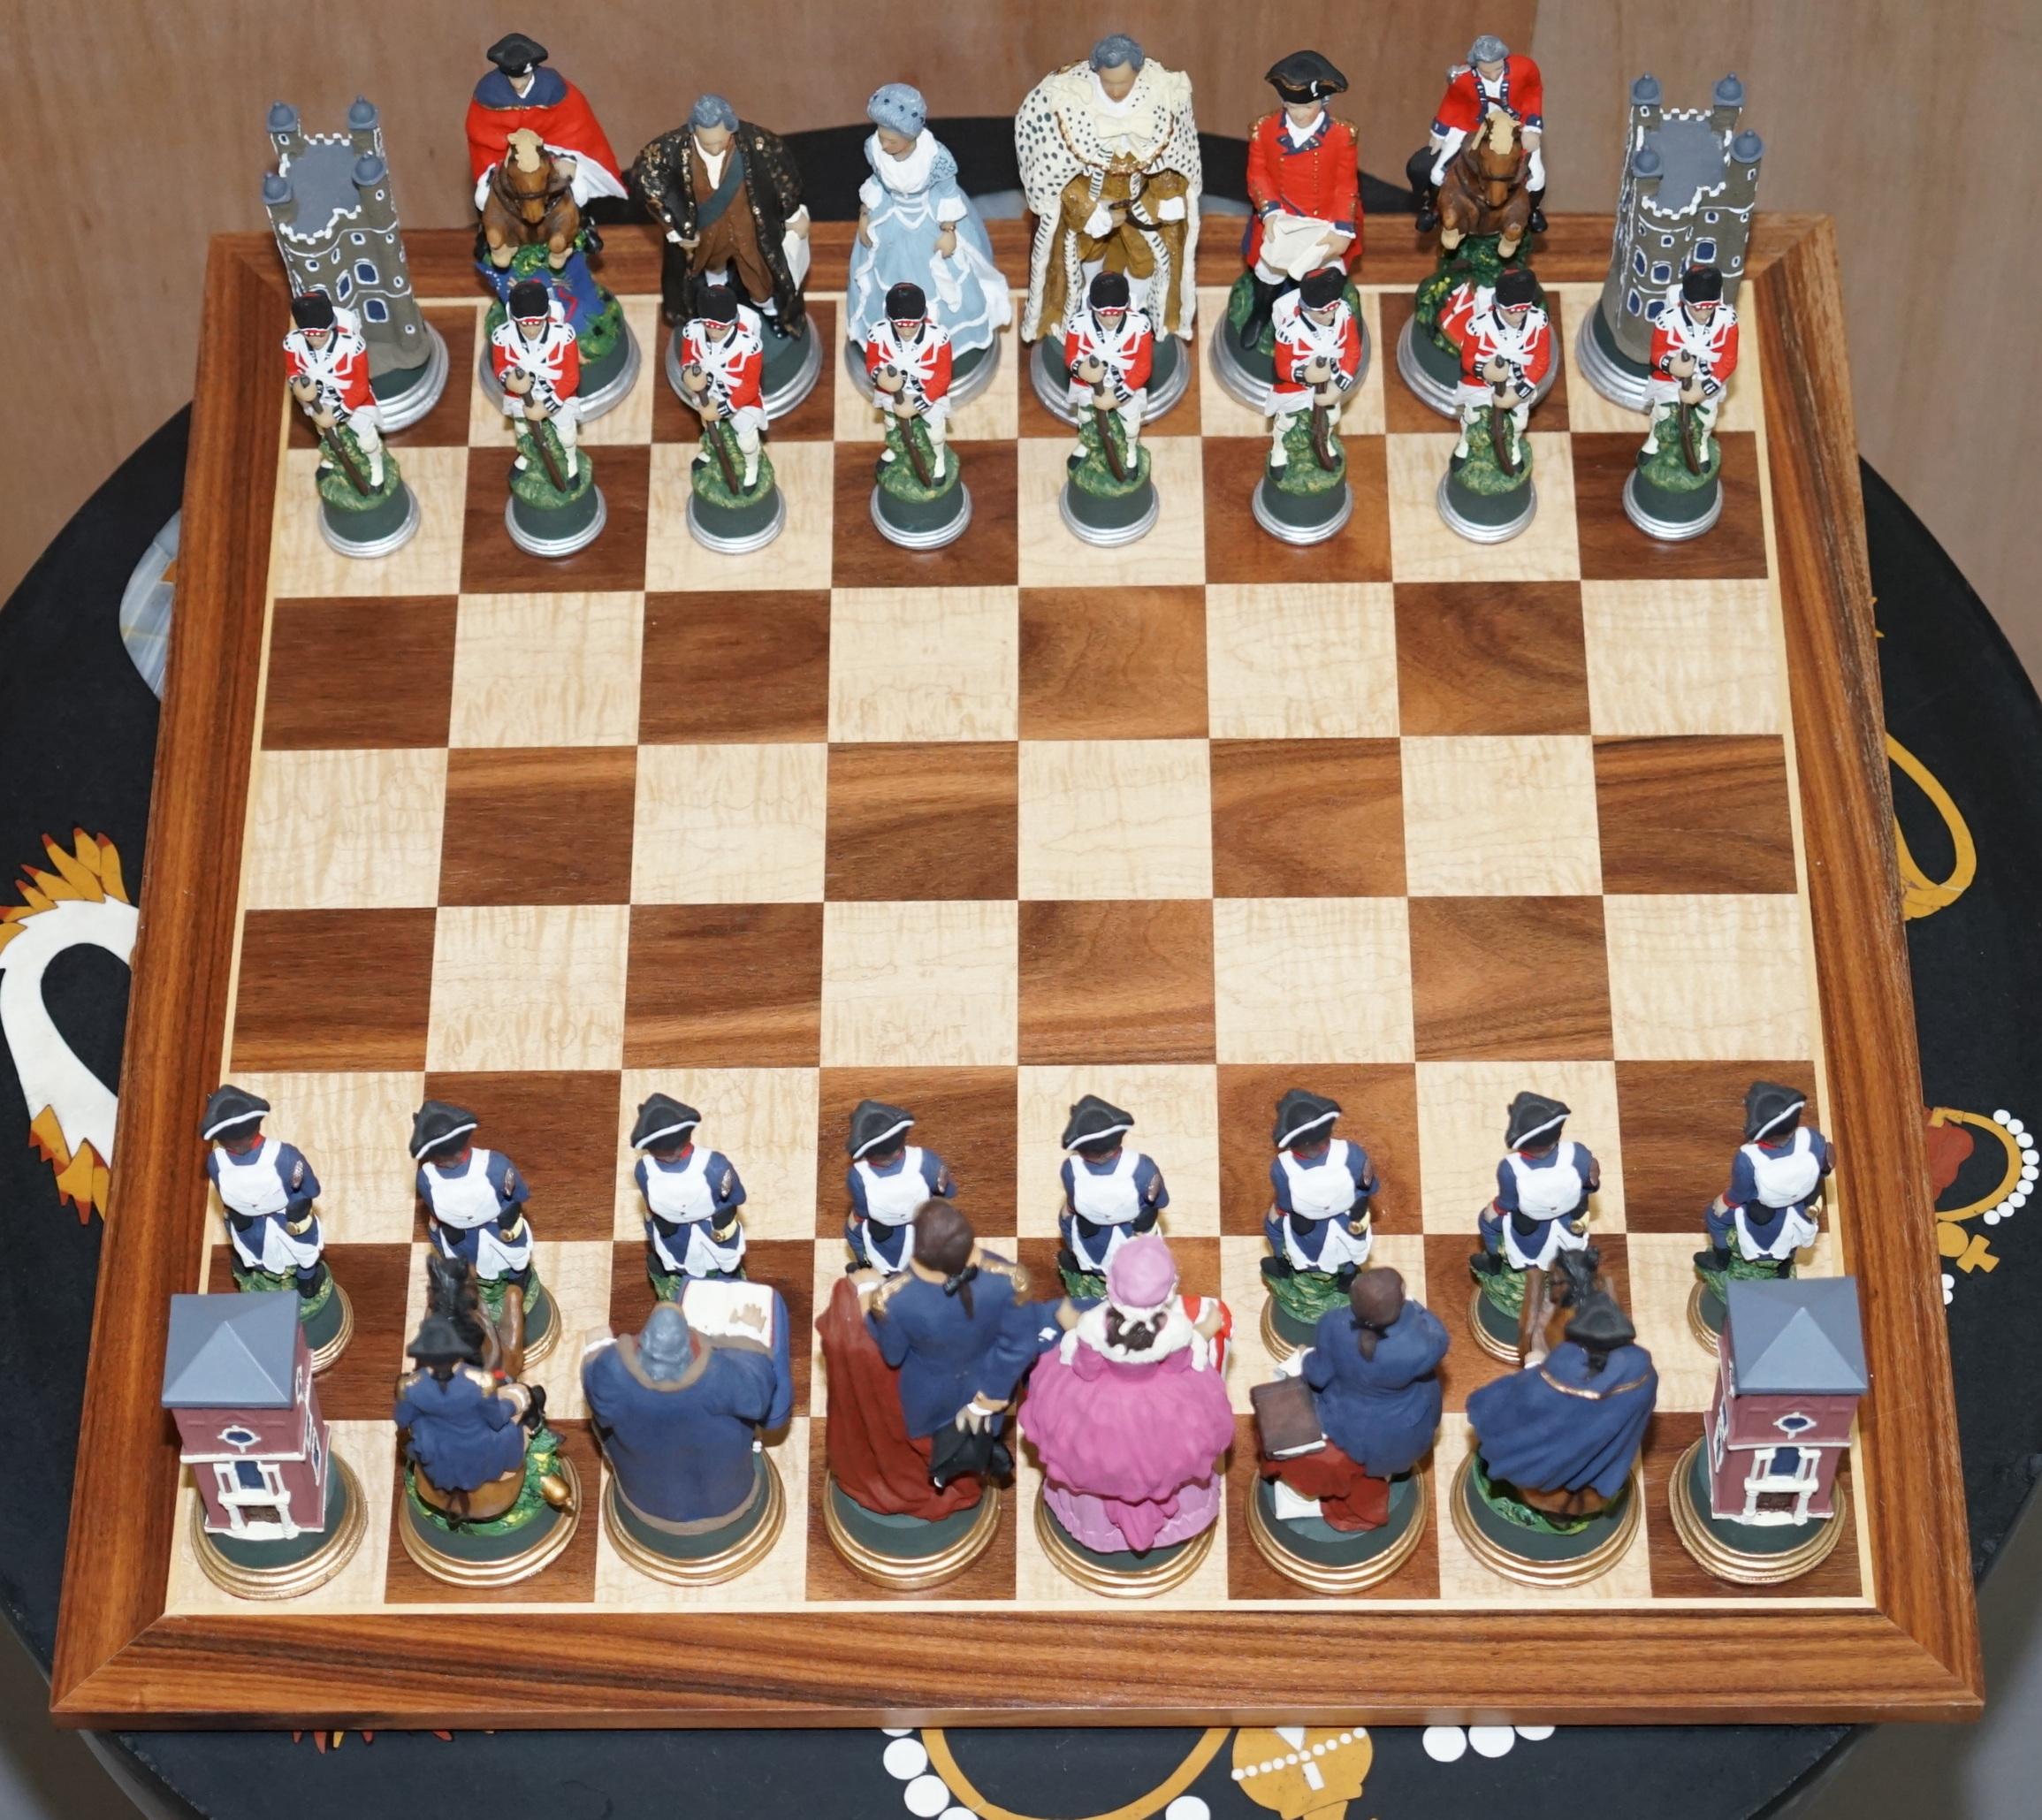 We are delighted to offer for sale this stunning new hand painted American War of Independence hand painted theme chess set

The board is Walnut and Maple veneer, its being included for free but it is the correct one for the set as it’s made by